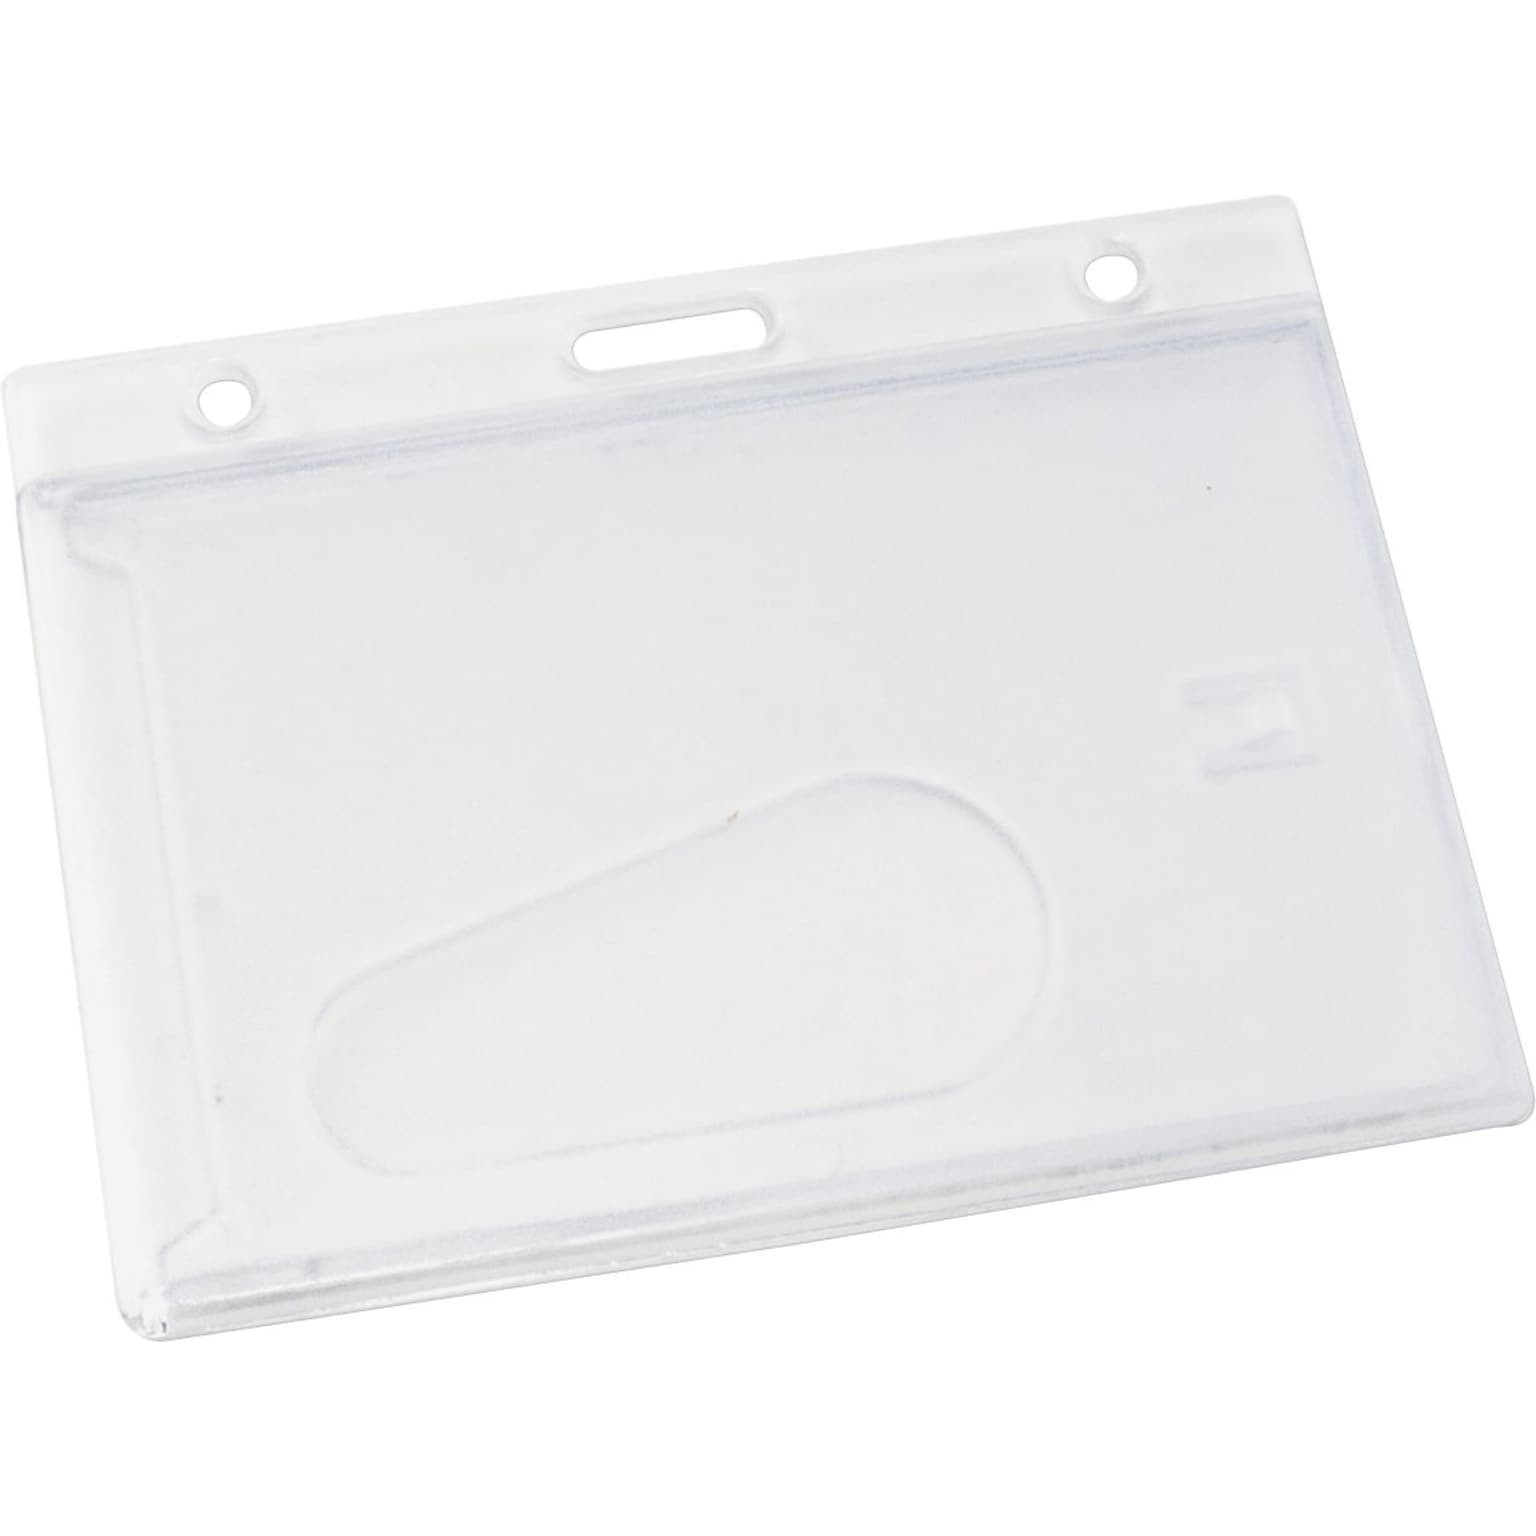 Frosted Rigid Badge Holder, 2 1/8 x 3 3/8, Clear, Horizontal, 25/Pk